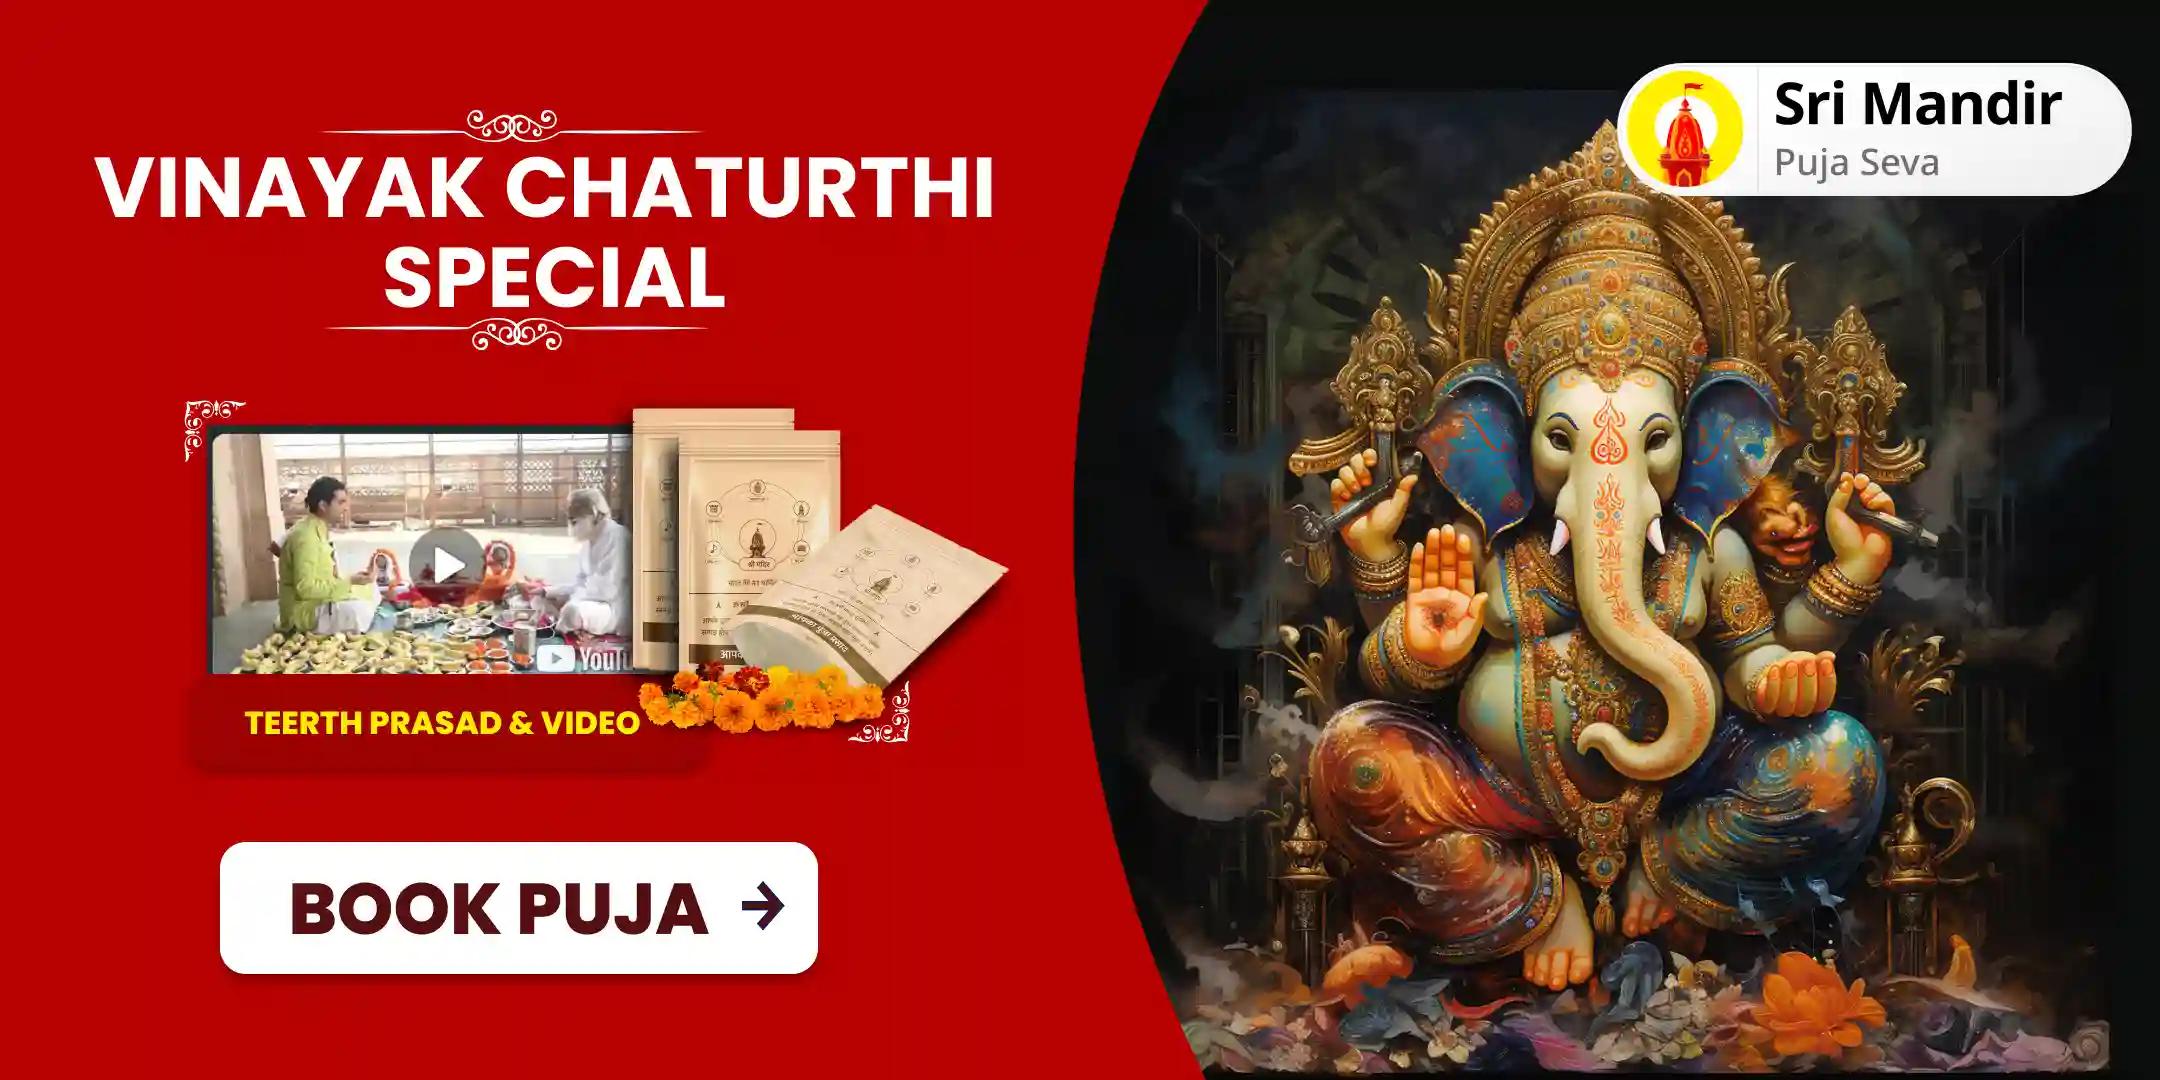 For Removal of Obstacles and Fulfilment of Wishes Vinayak Chaturthi Special Ganesh Atharvashirsha Path, Abhishekam Puja and 1008 Sahasranamam Path